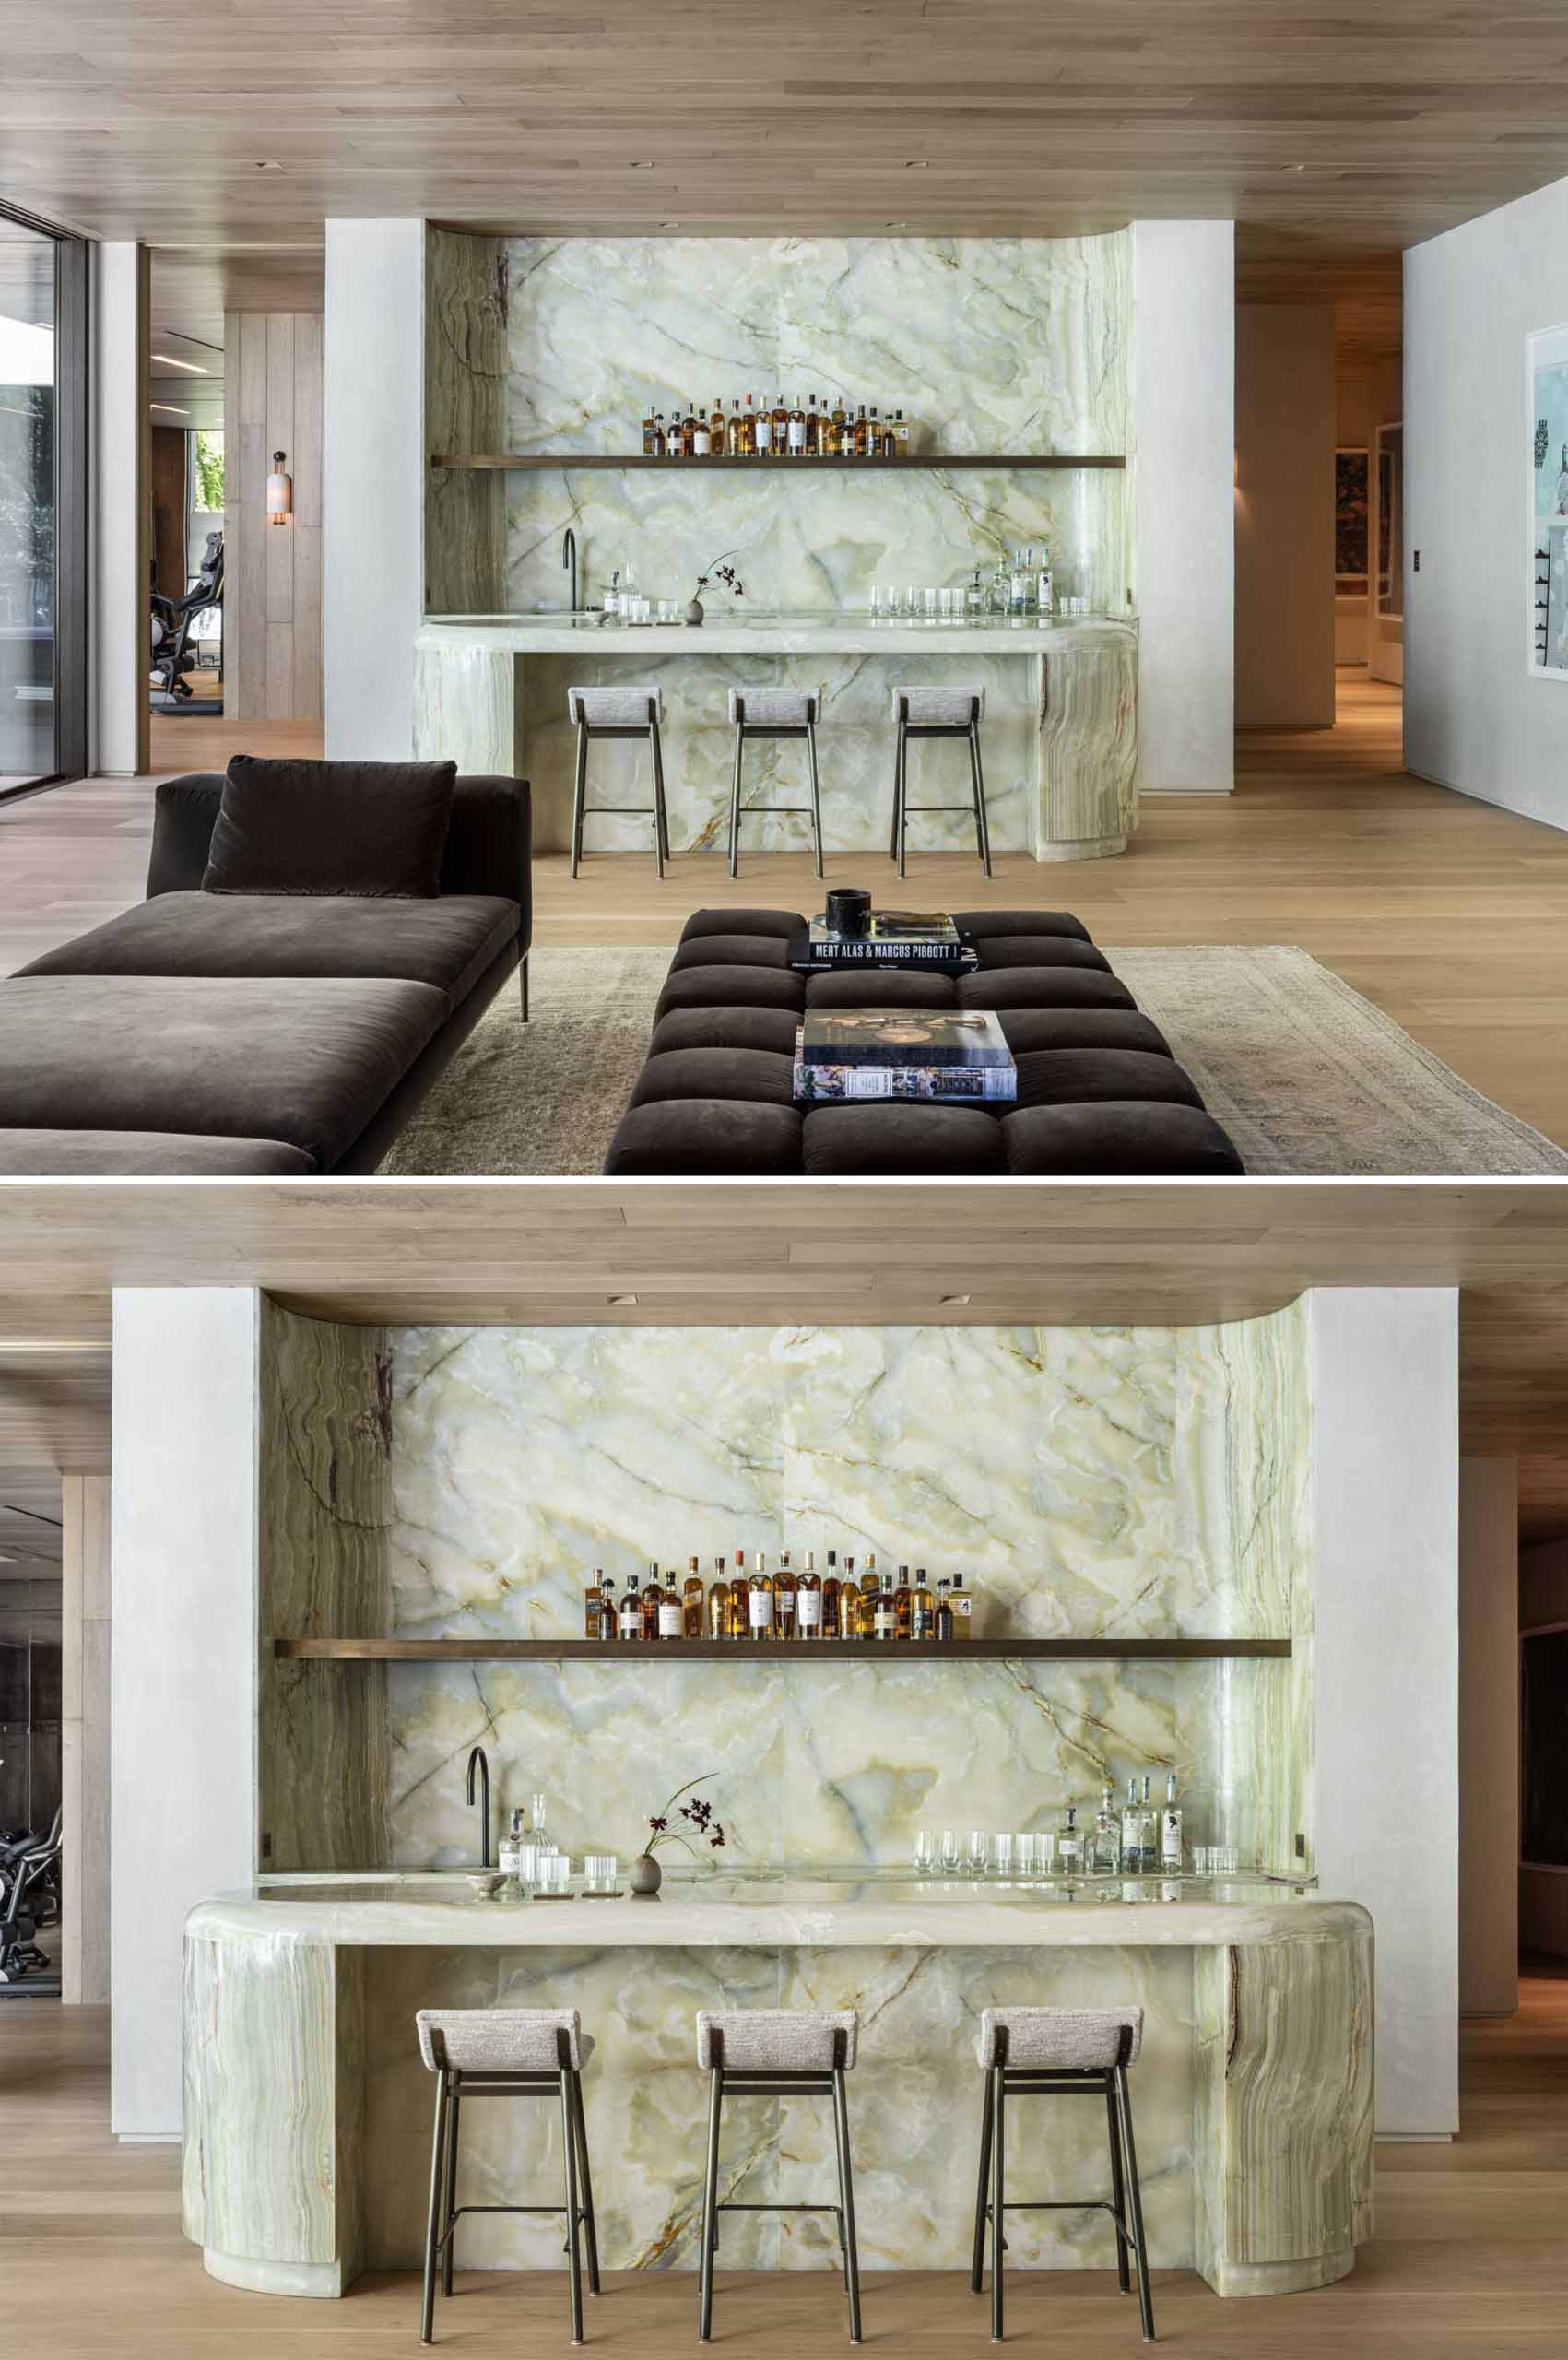 A custom bar lined with green stone draws attention and offers another place to relax in the home.